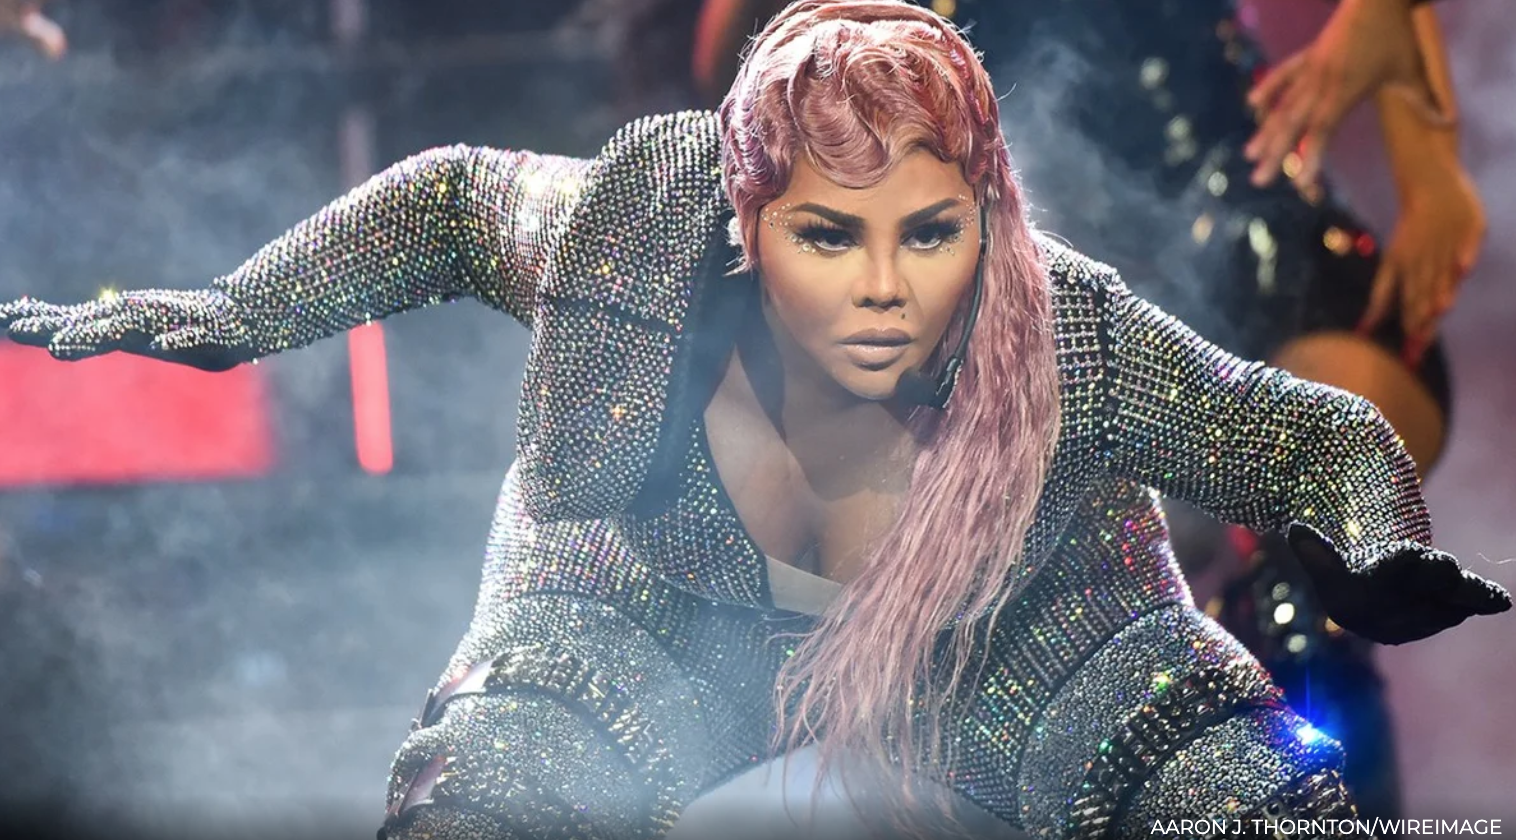 An Iconic Lil Kim Dance move saves woman in tragic drive-by shooting